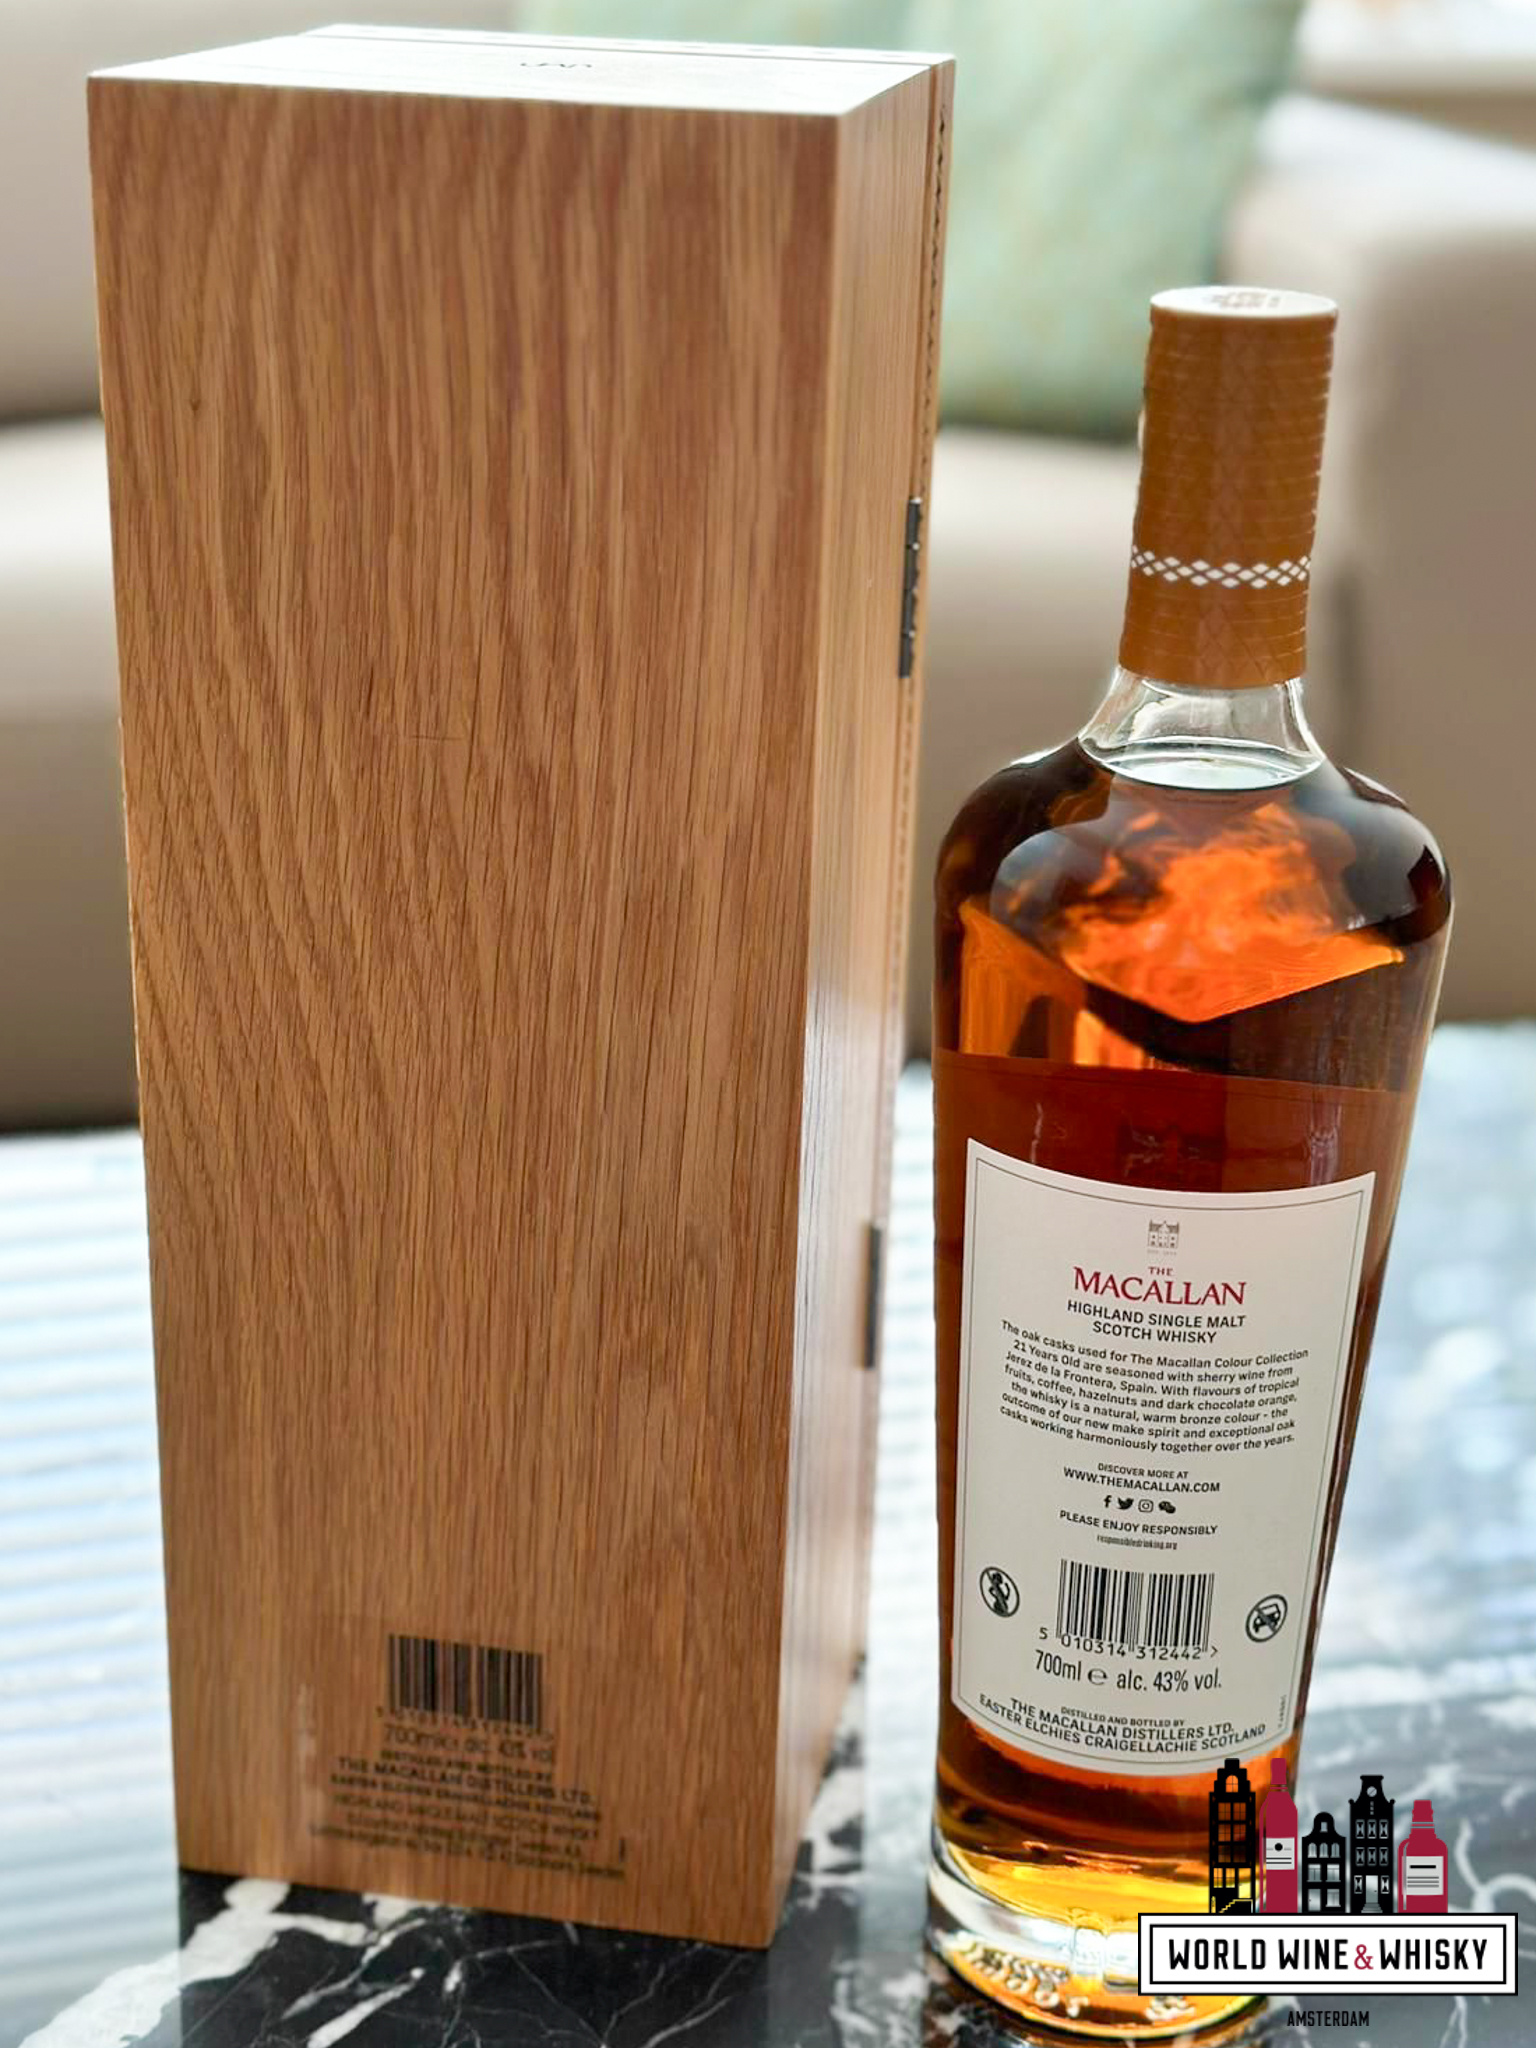 Macallan Macallan 21 Years Old 2023 - Colour Collection 43%